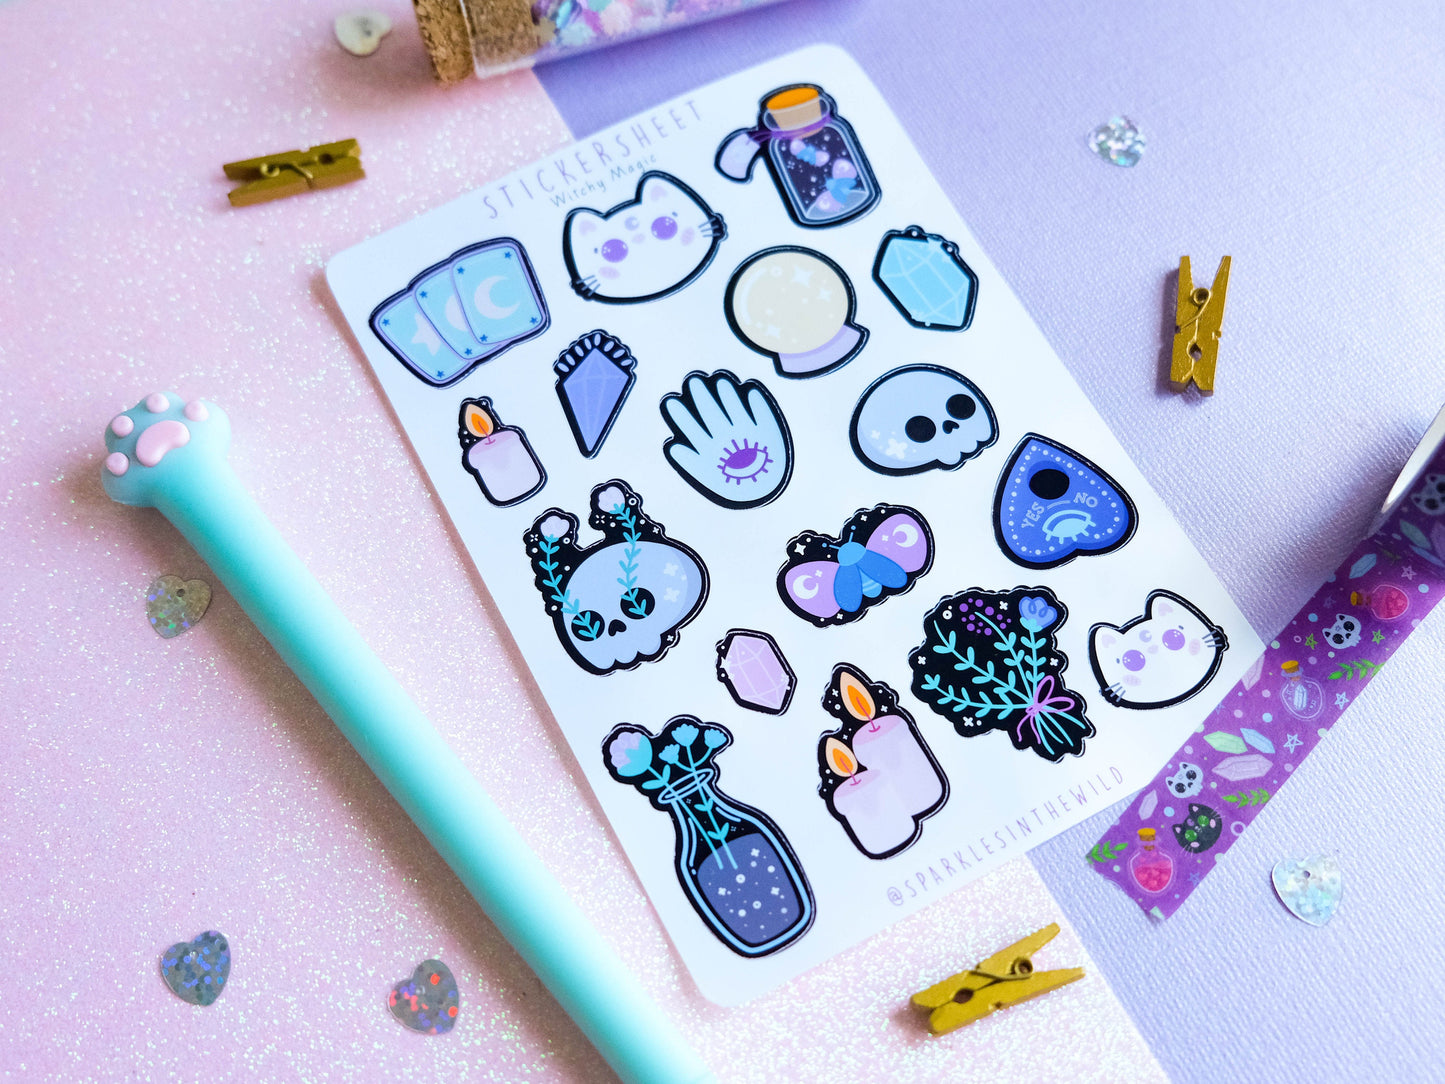 Stickersheet water resistant Witchcraft and Magical stickers perfect to decorate bujo and planners